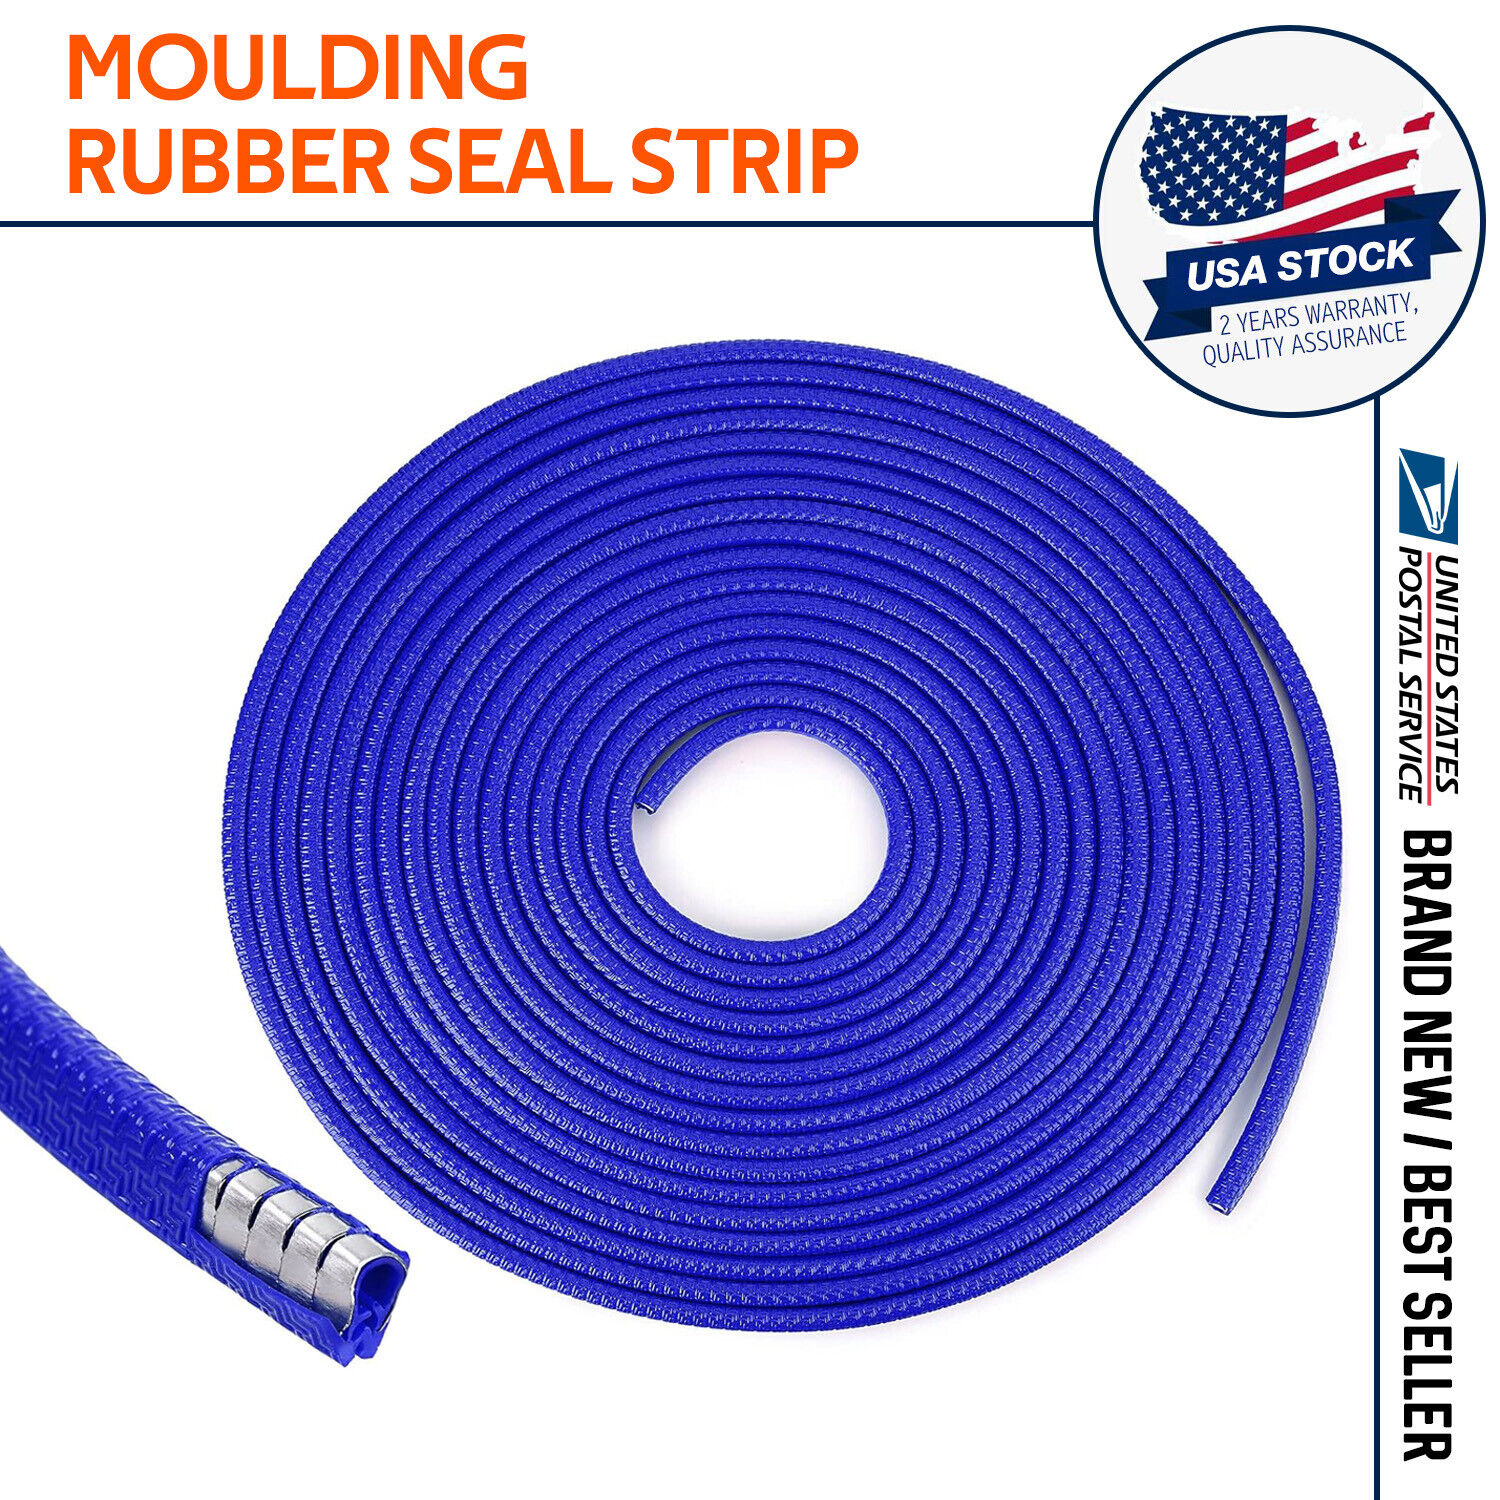 40ft Car Edge Trim Guard Molding Rubber Seal Strip Protector Fit for Ford Honda